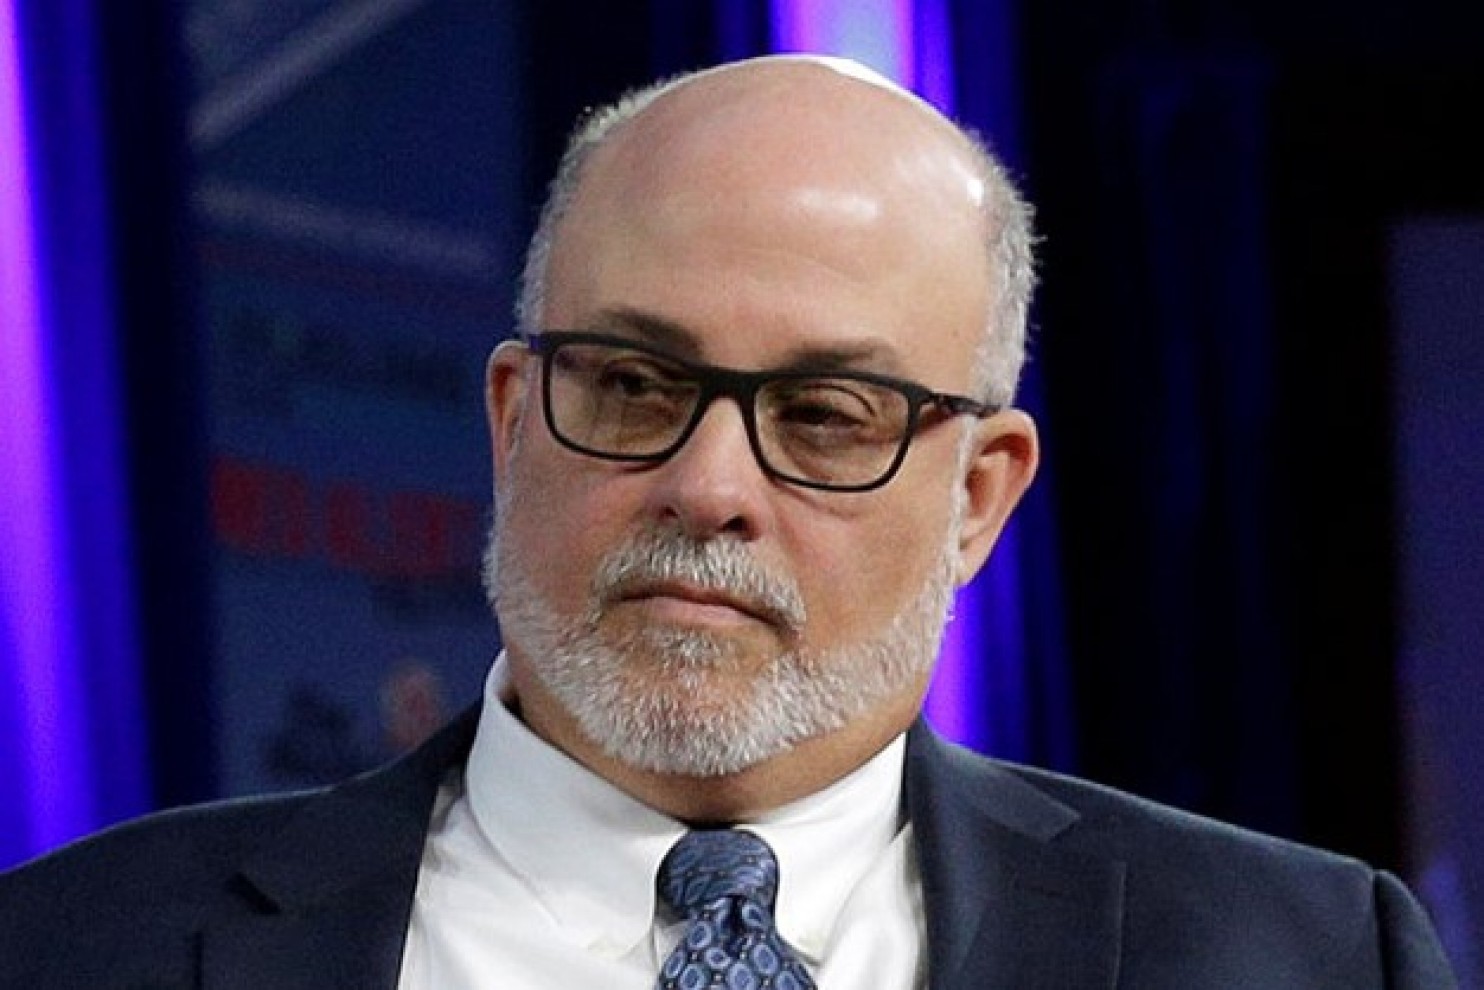 Mark Levin: Open Letter to CNN'S Brian Stelter: 'You are thoroughly dishonest' - Artvoice